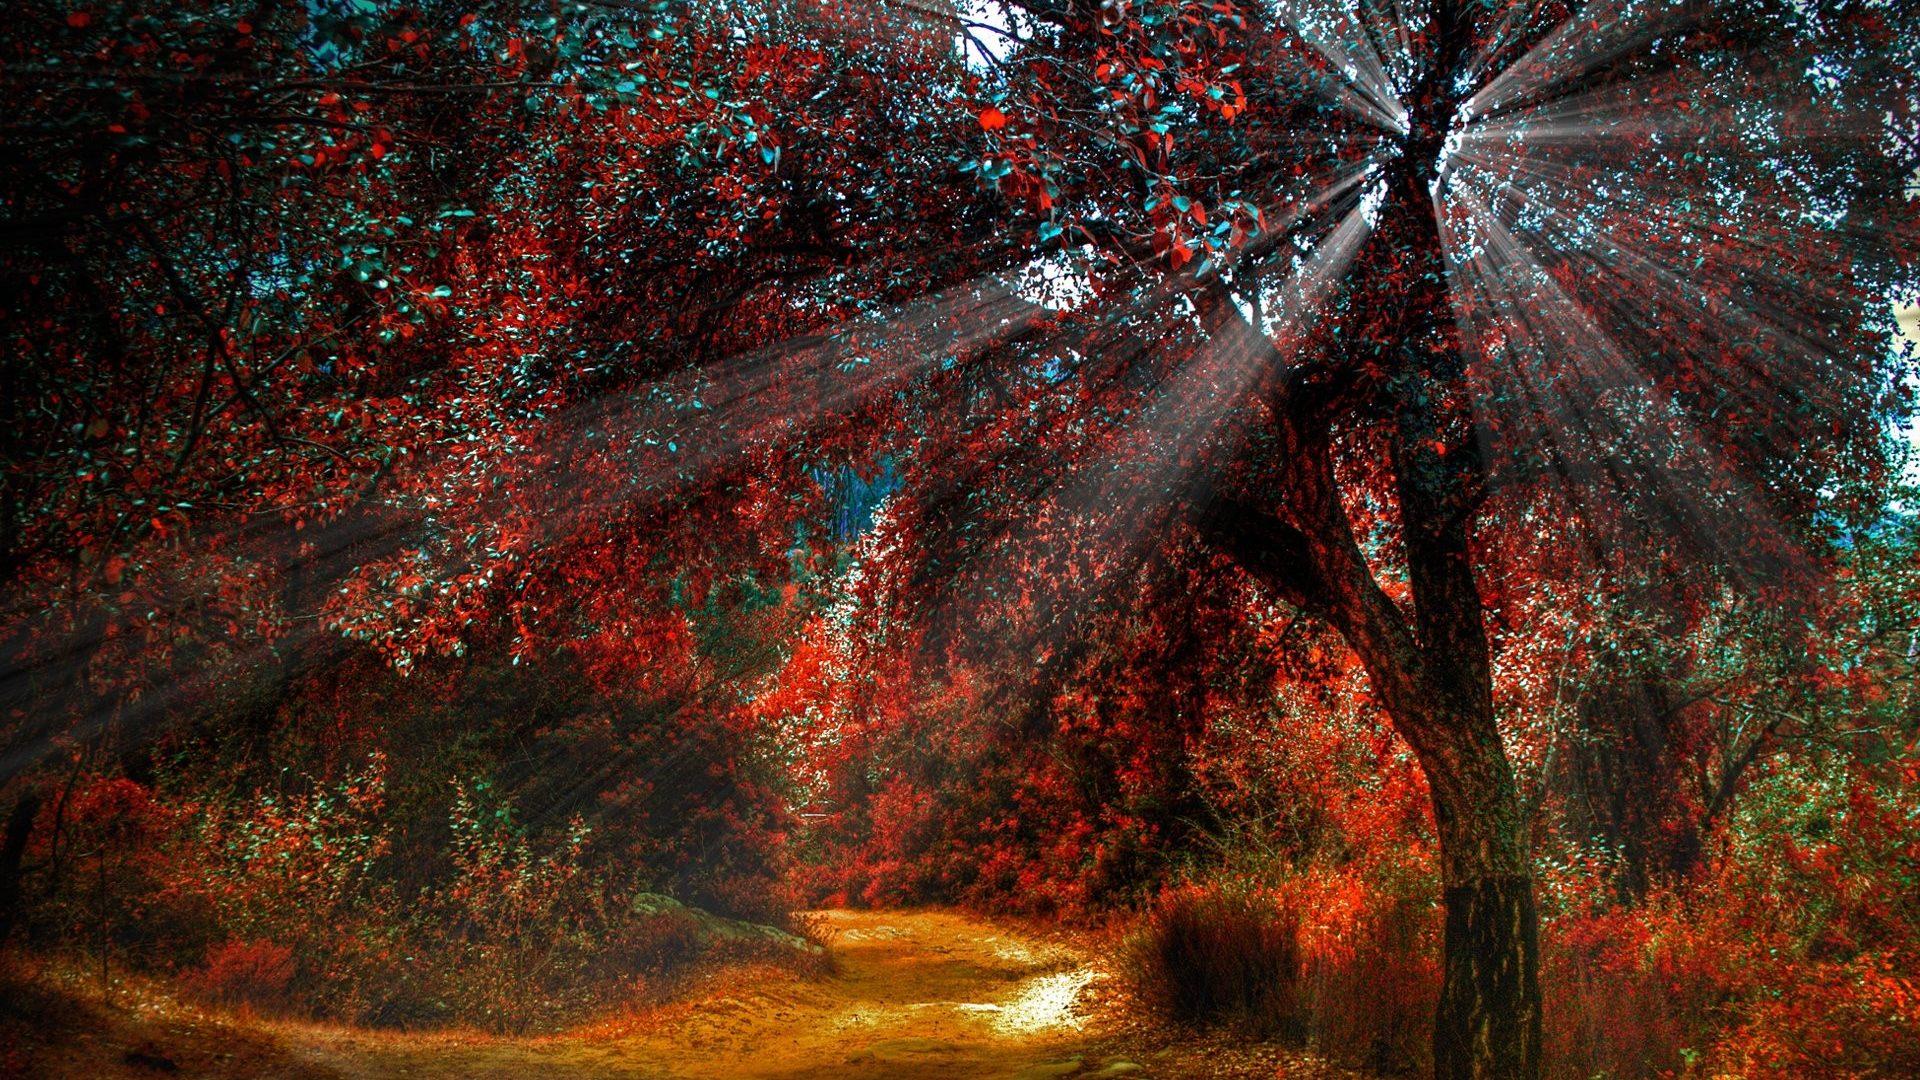 Forests: Trail Red Seasons Landscapes Magical Autumn Fall Nature Sun